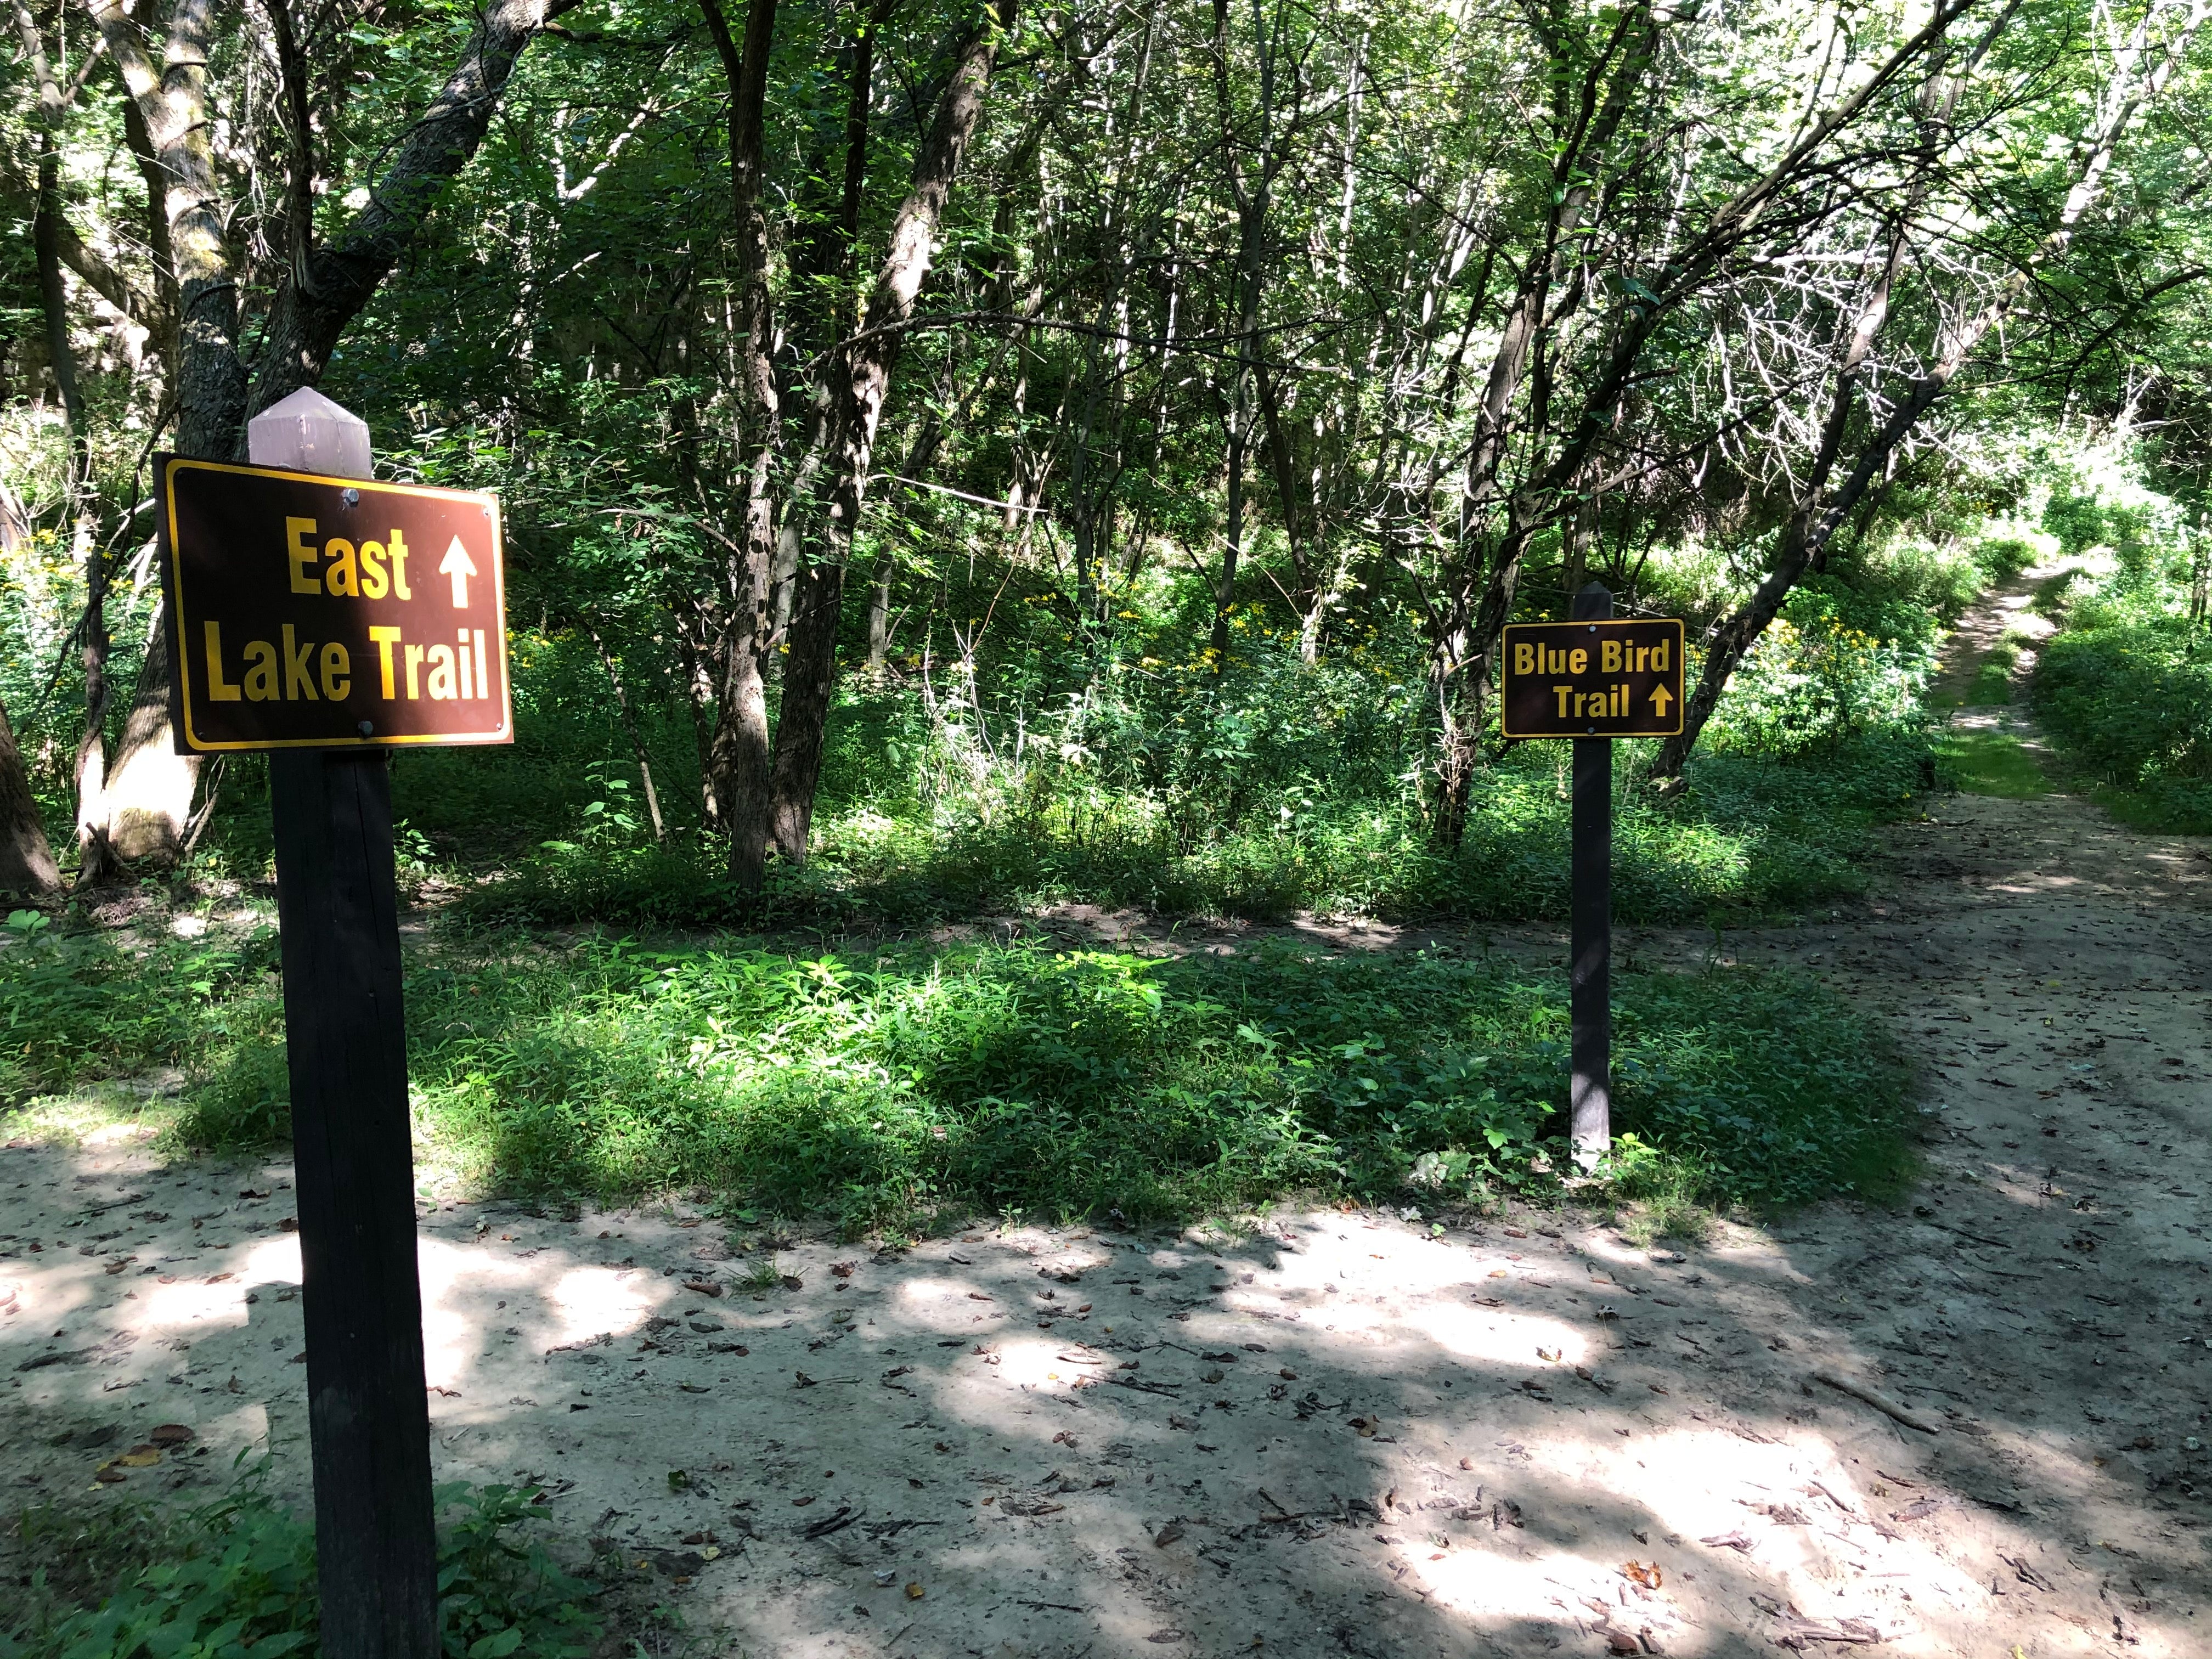 You can choose to stay on the East Lake trail or veer off onto the Blue Bird trail